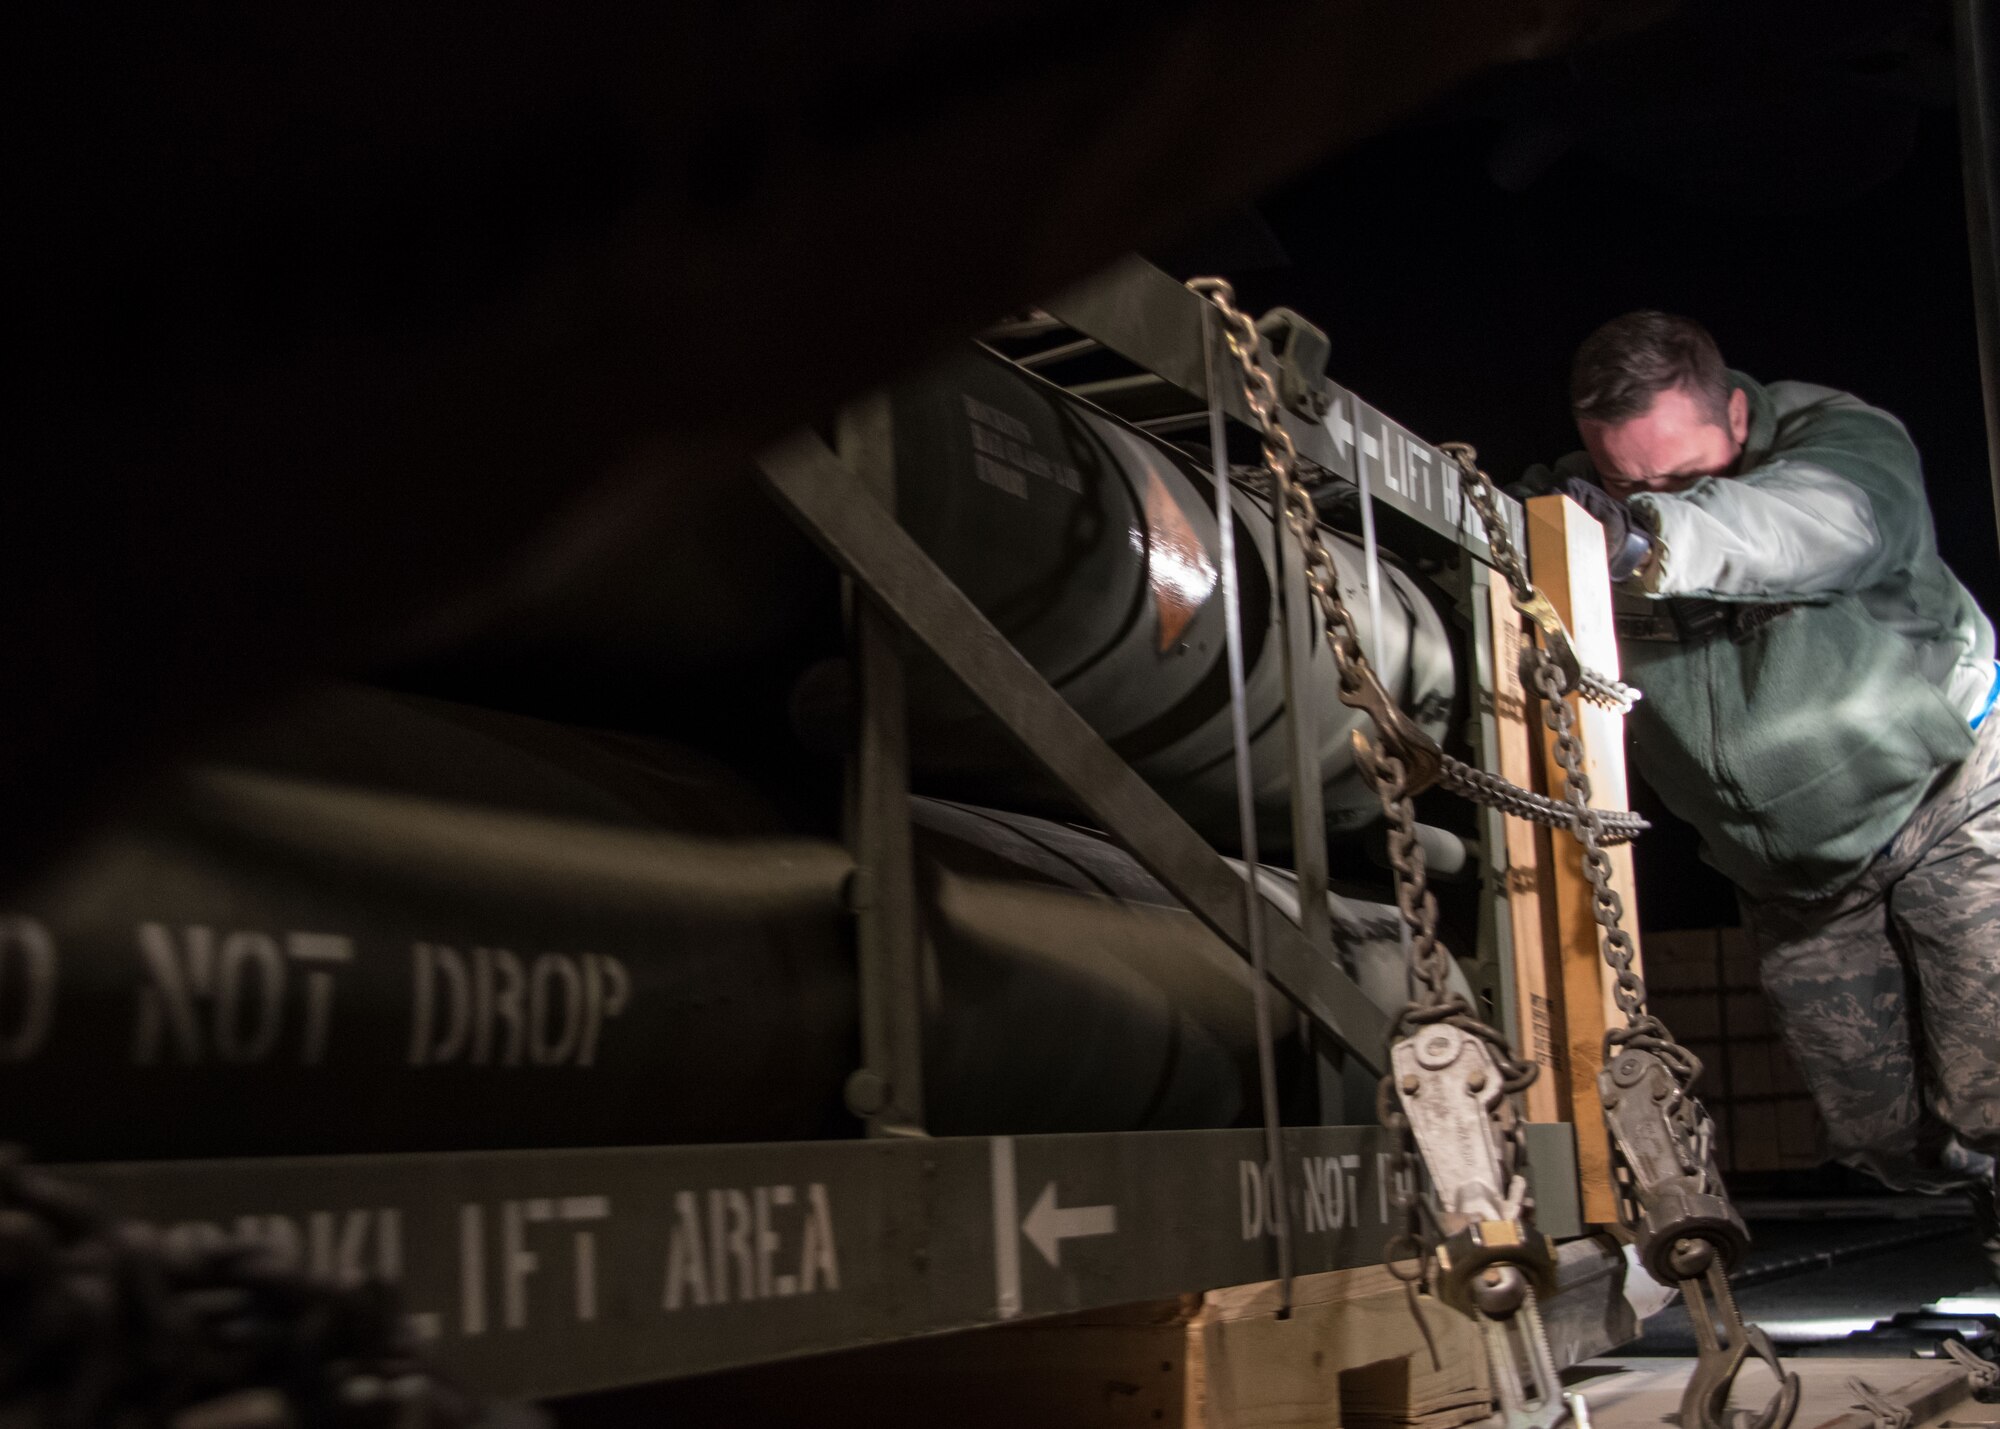 A 386th Expeditionary Logistics Readiness Squadron aerial porter pushes a pallet of rockets into the cargo area of a C-130H Hercules at an undisclosed location in Southwest Asia, Feb. 3, 2017. The aerial porters work with loadmasters to ensure the weight of the cargo is properly distributed to not affect the aircraft’s flight. (U.S. Air Force photo/Senior Airman Andrew Park)